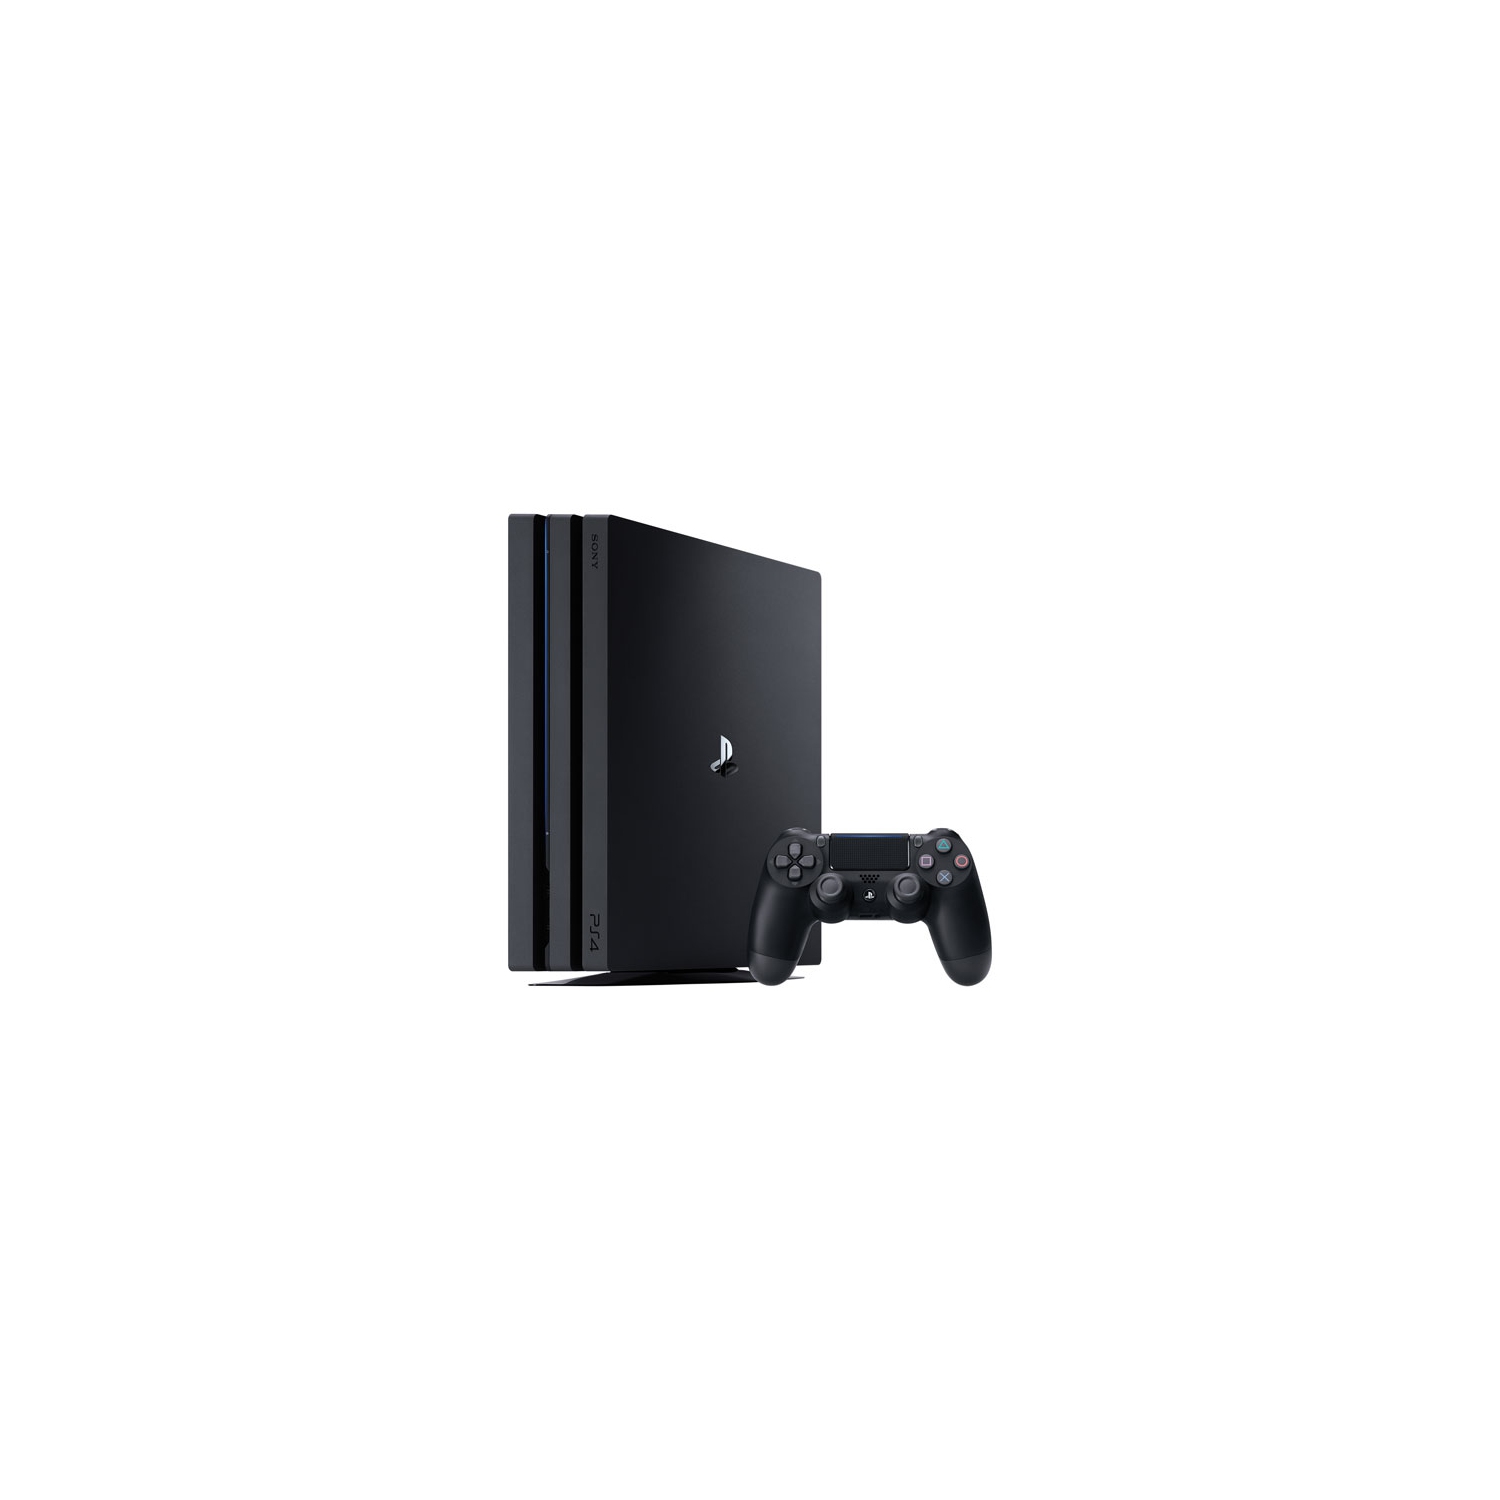 Refurbished (Excellent) - PlayStation 4 Pro 1TB Console